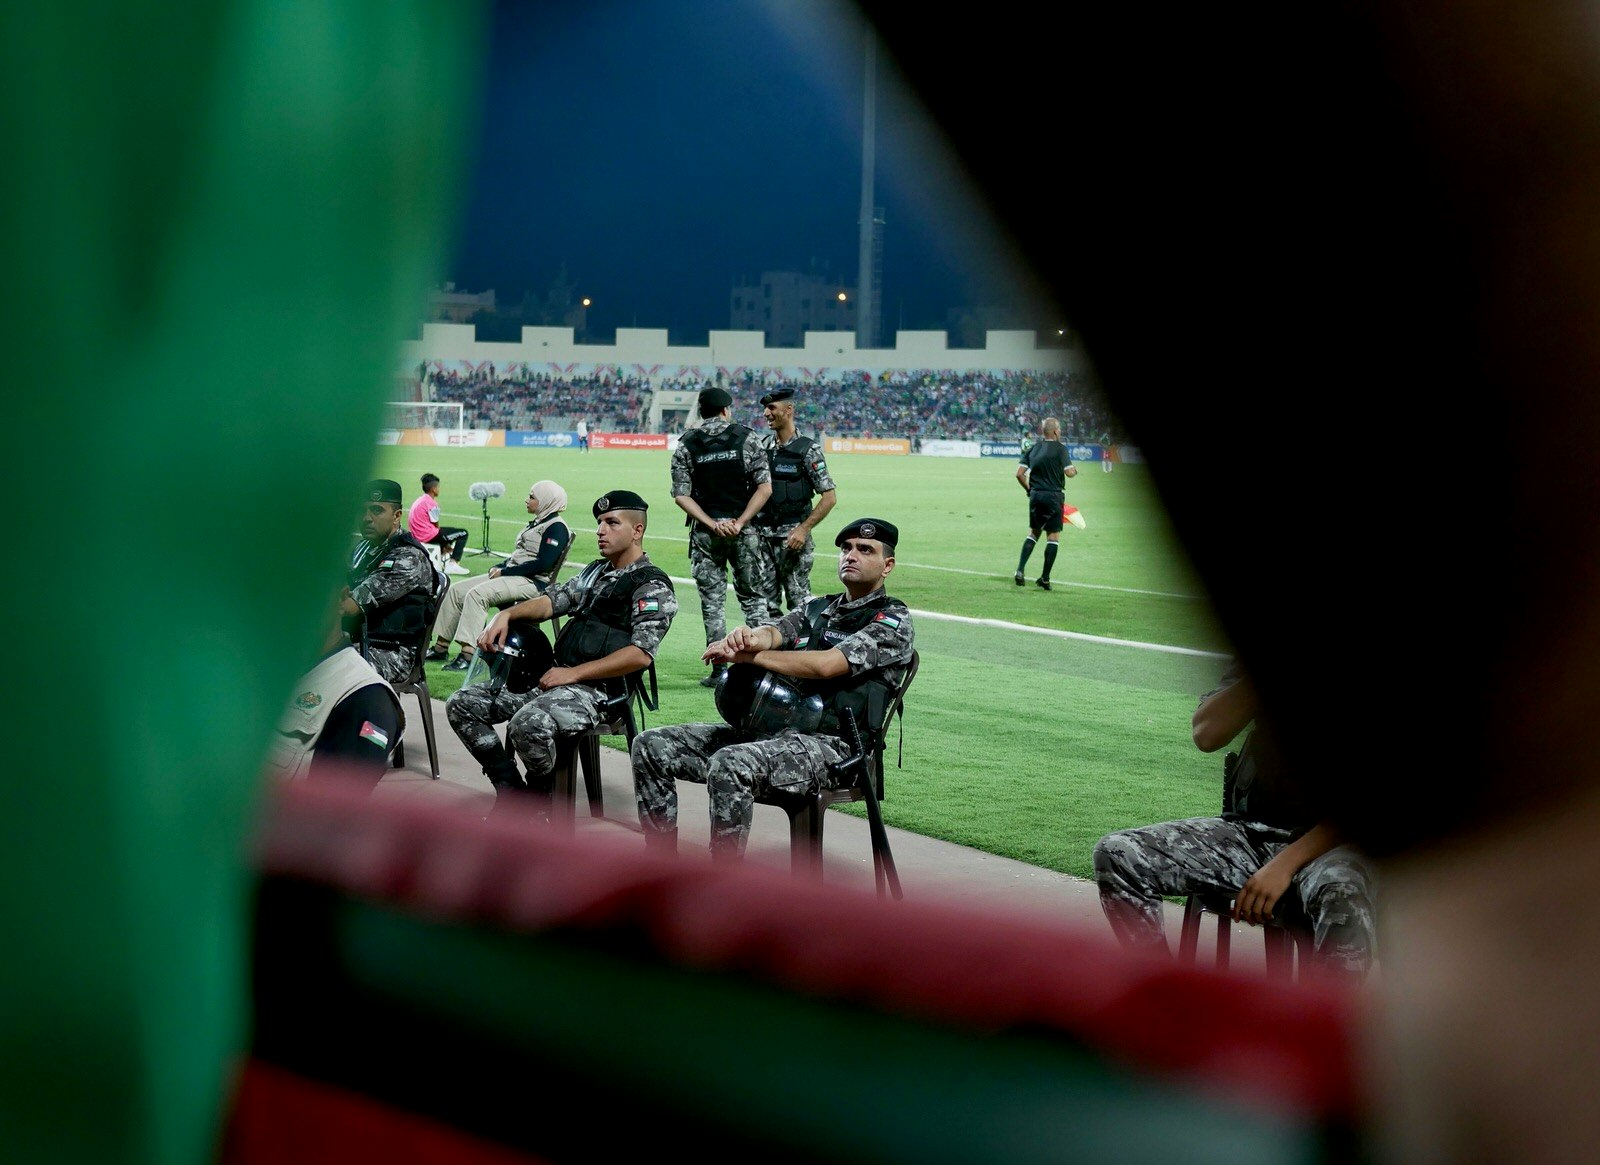 Riot police surround the field during a Wehdat v Faisaly football match in Amman, Jordan